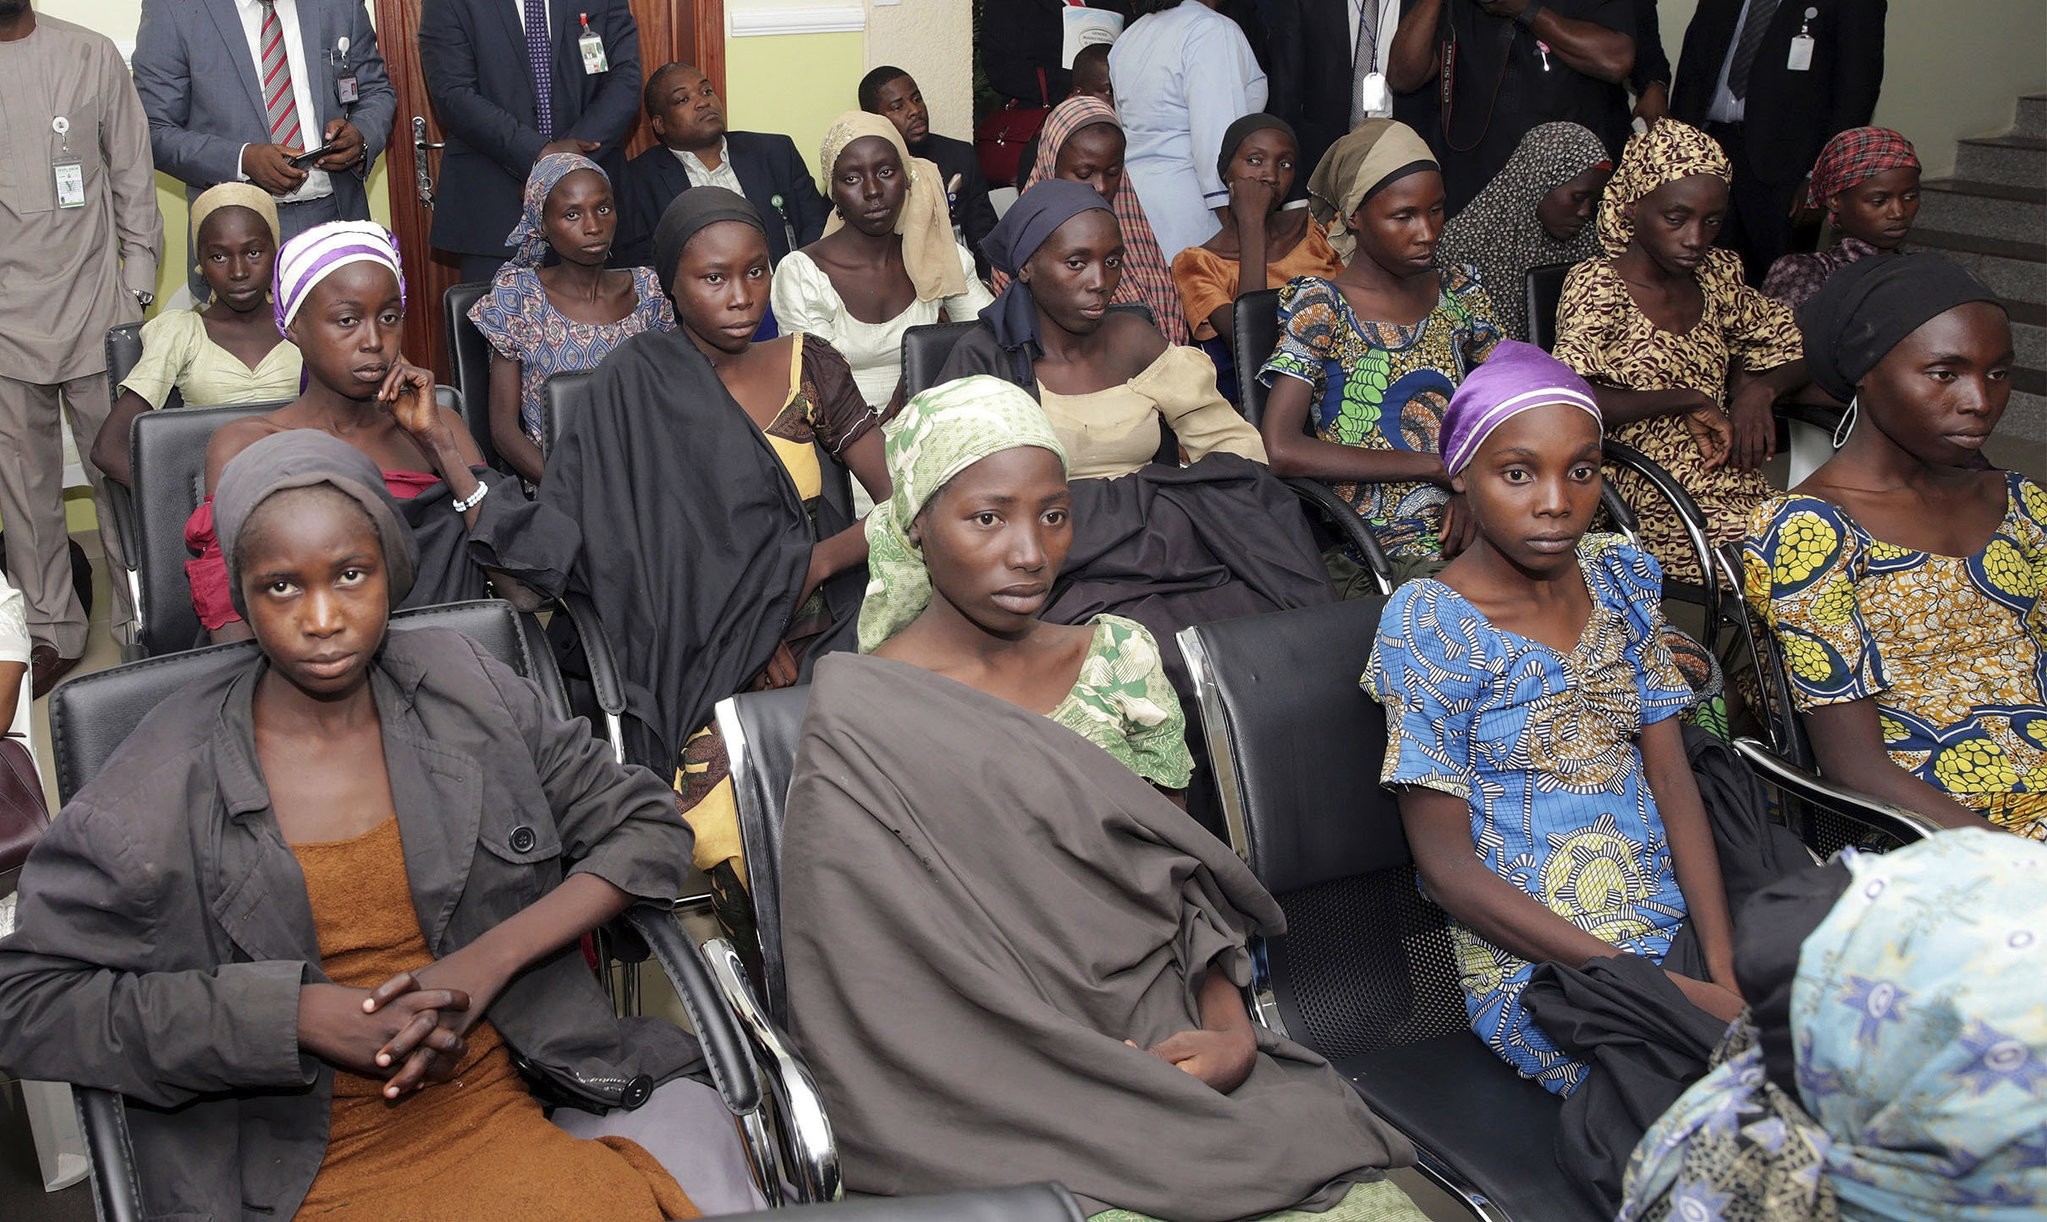 In this Thursday, Oct. 13, 2016 file photo released by the Nigeria State House, Chibok schoolgirls recently freed from extremist captivity are seen during a meeting with Nigeria's Vice President Yemi Osinbajo in Abuja. (AP Photo)